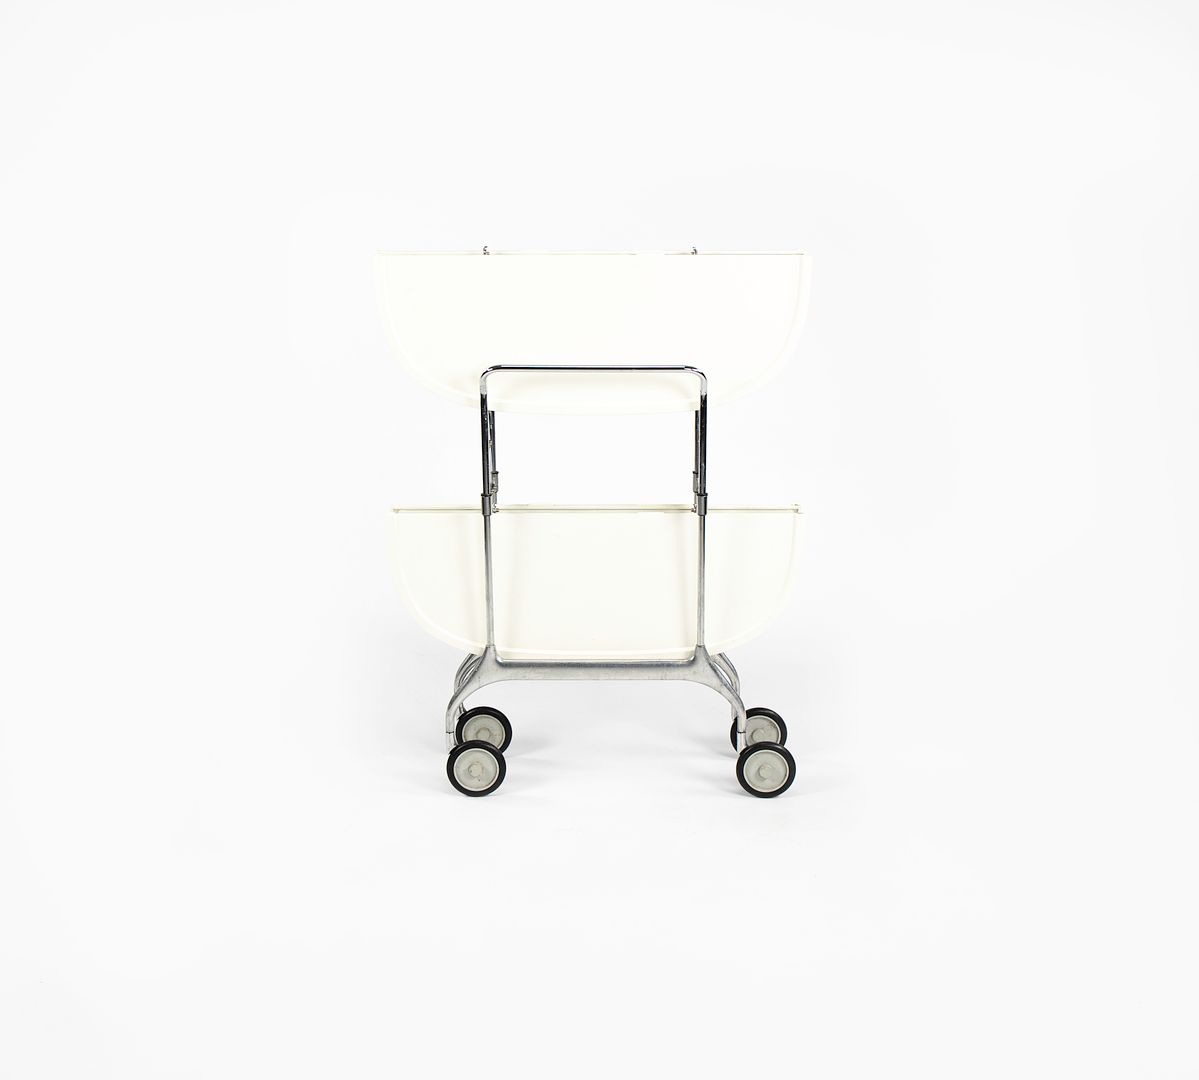 2009 Gastone Trolley Bar Cart, Model 4470 by Antonio Citterio and Glen Oliver Low for Kartell Steel, Chrome, Aluminum, Plastic, Paint, Rubber